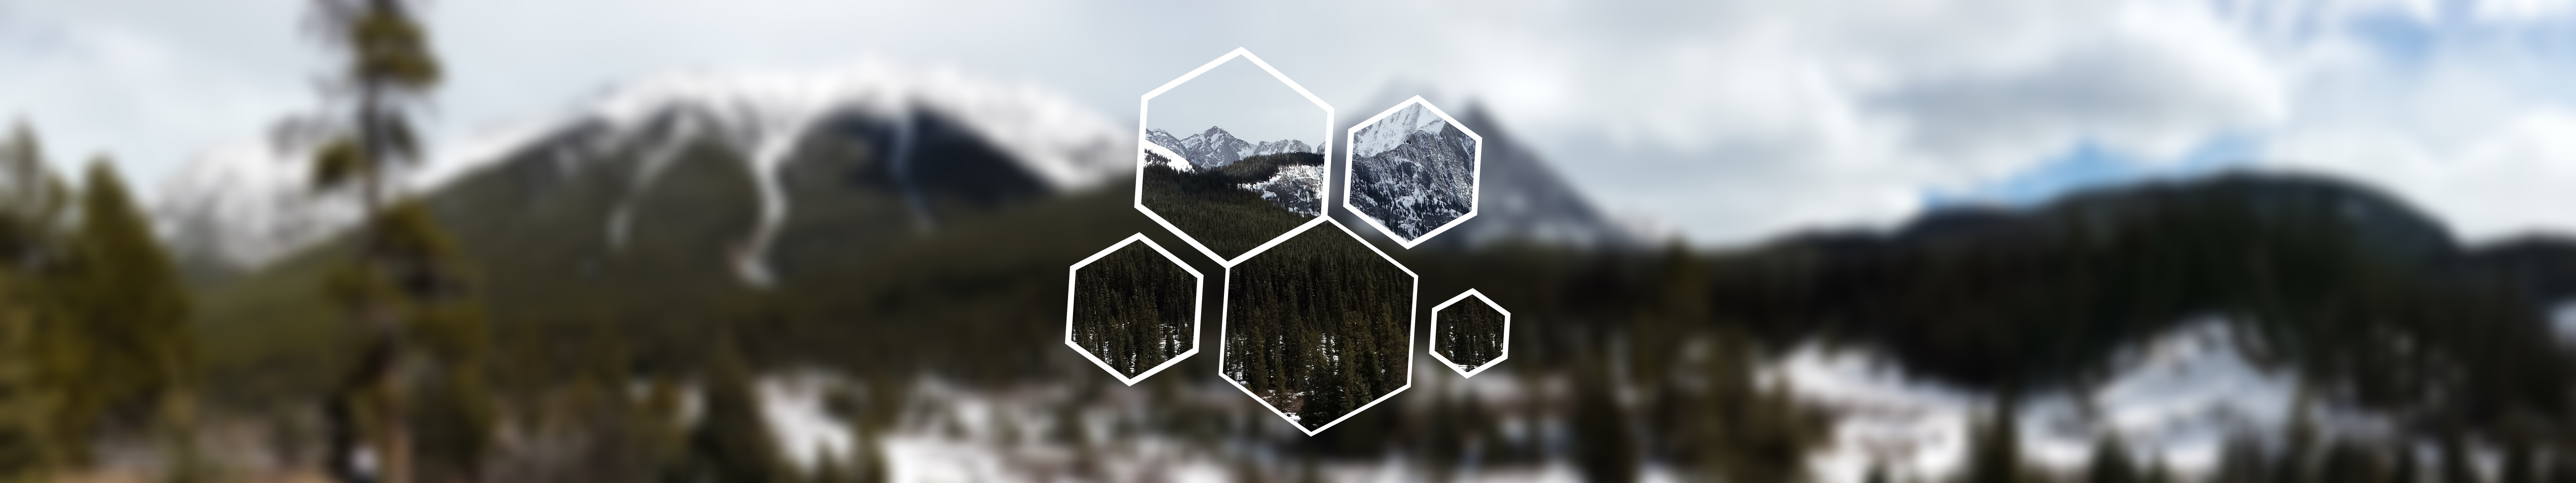 General 7680x1440 ultrawide hexagon mountain chain forest blurred geometric figures nature mountains polyscape digital art multiple display photo manipulation